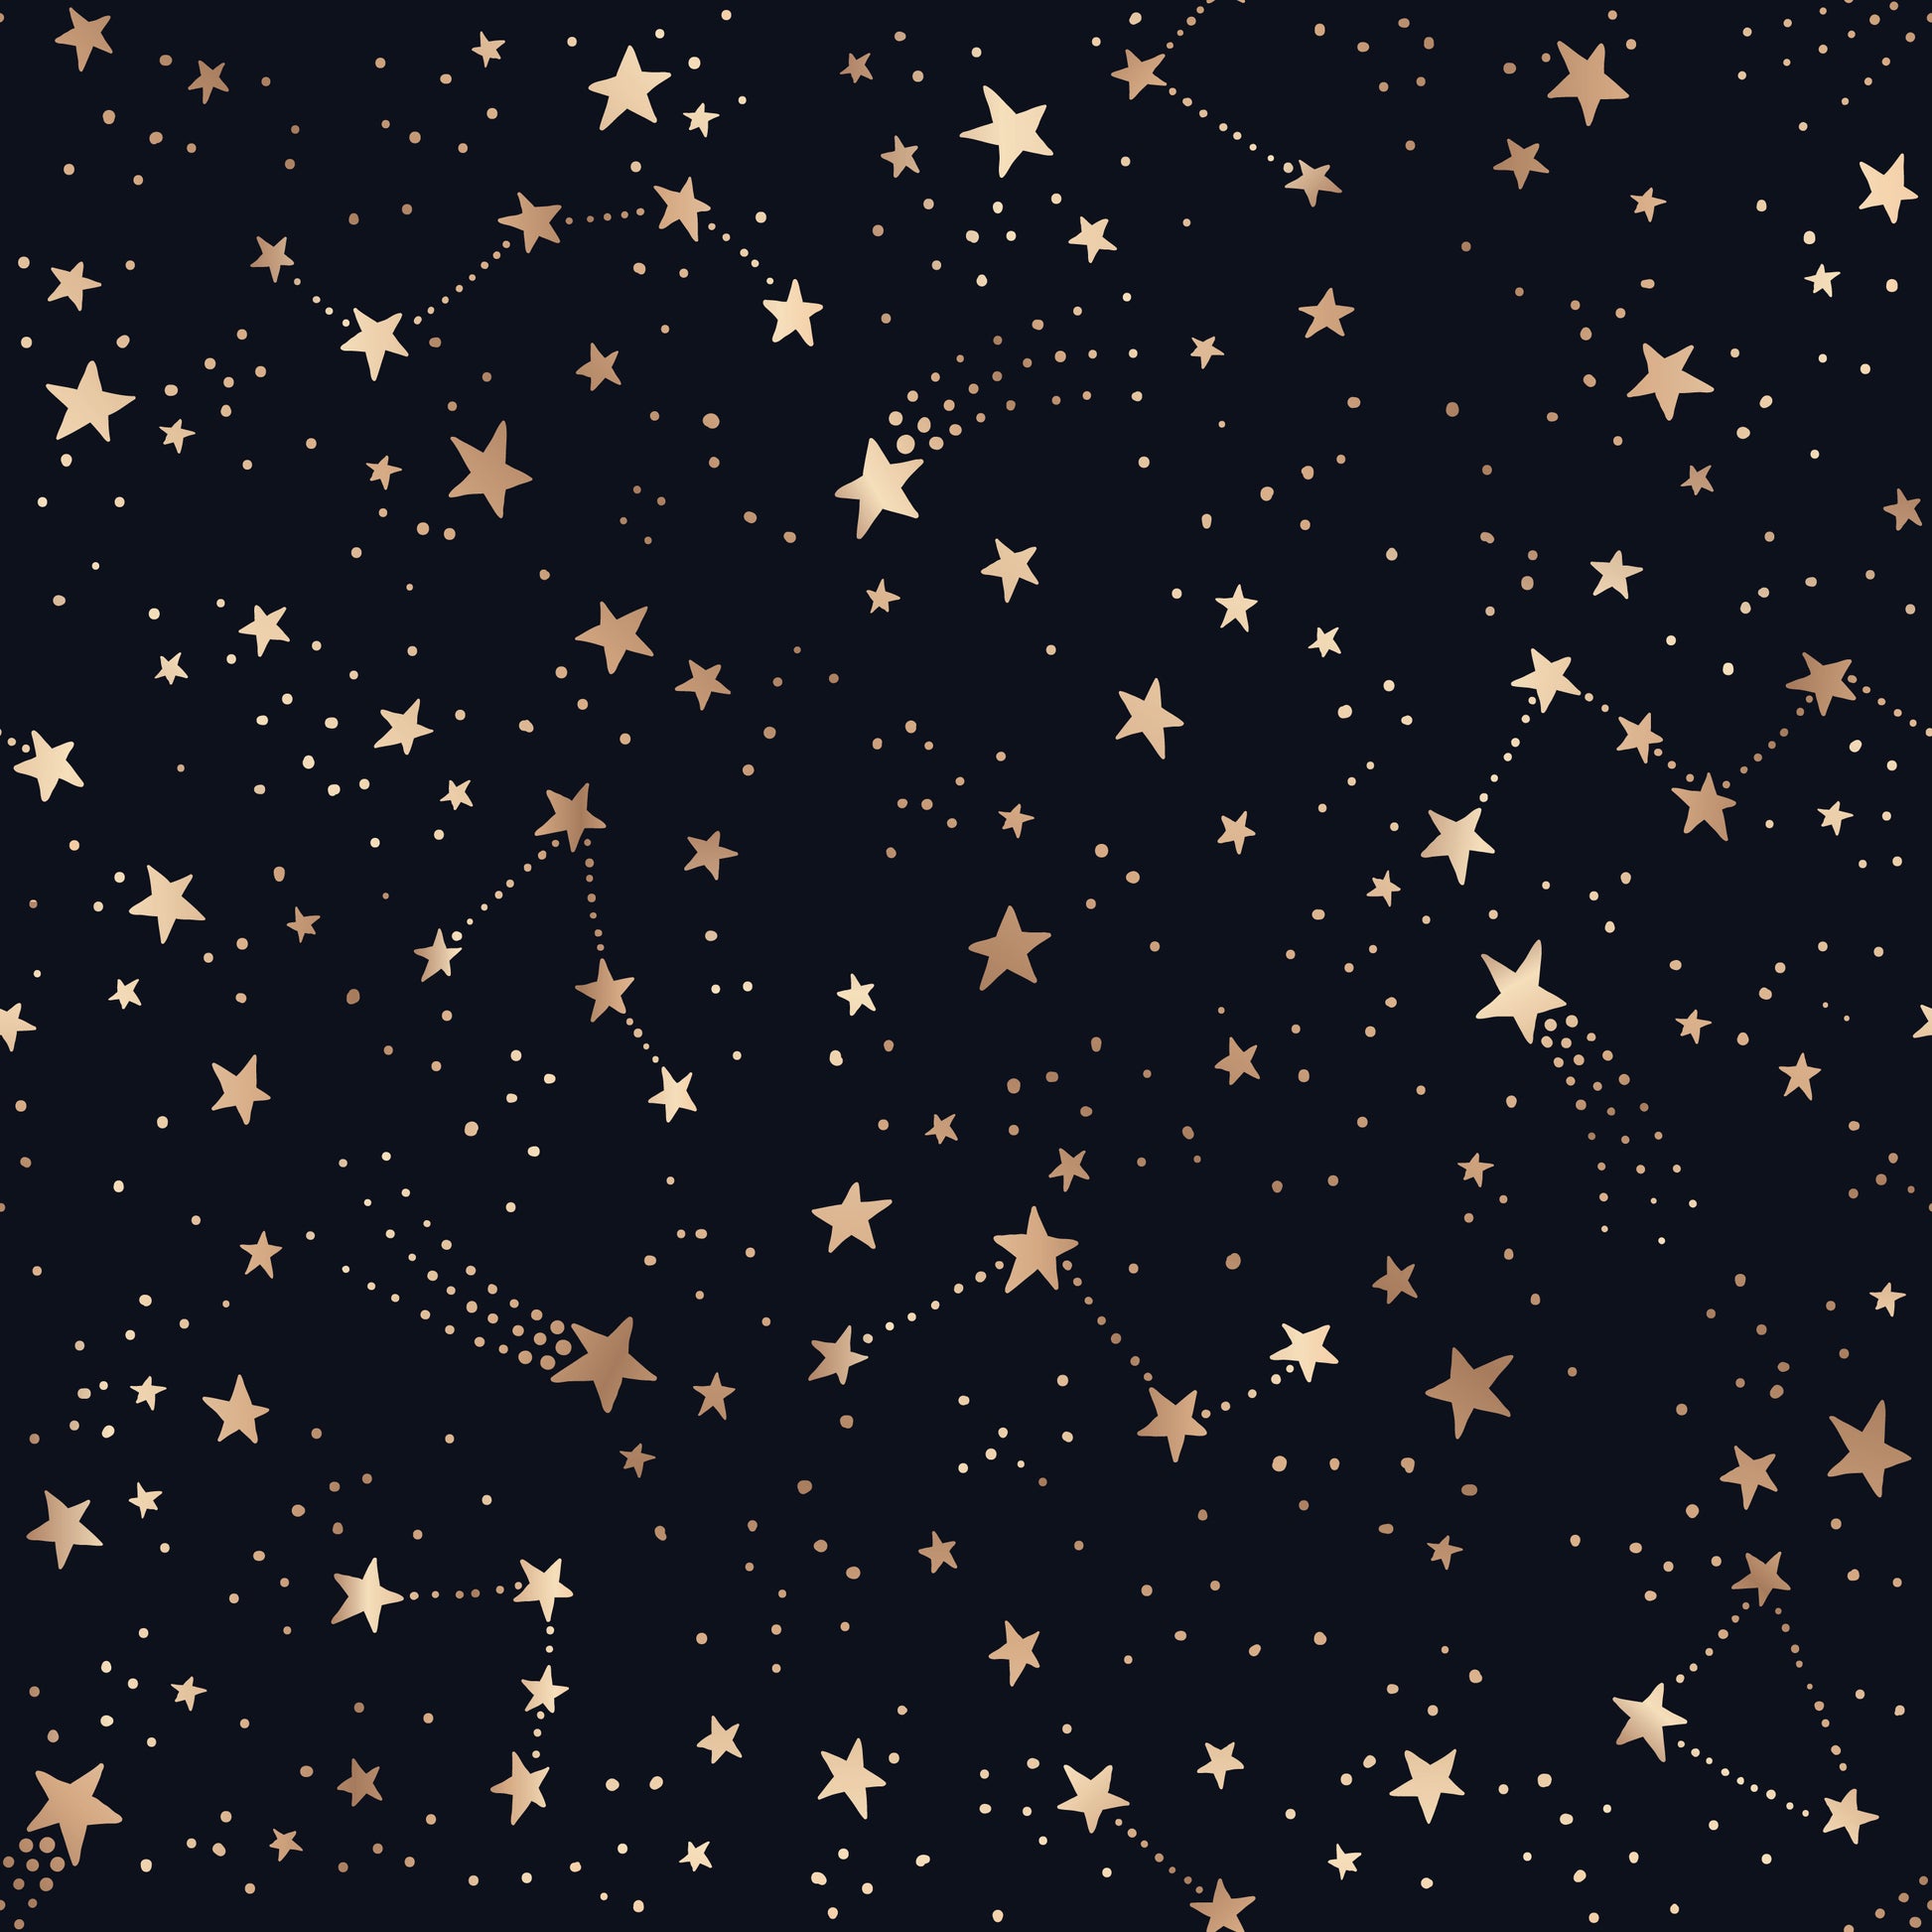 Wallpaper pattern featuring constellations and stars on a nearly black night sky